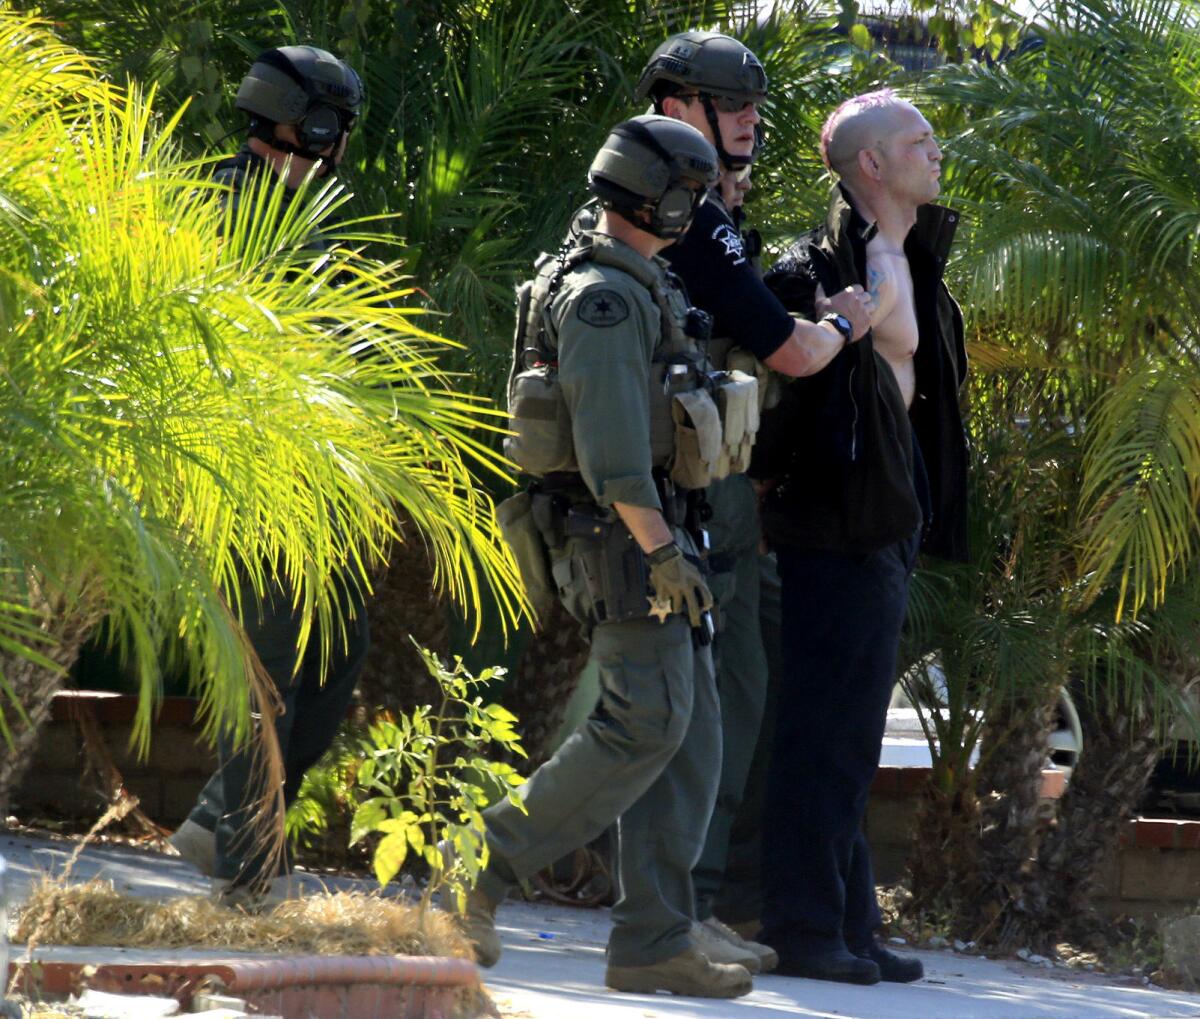 In October 2014, Jason "Mayhem" Miller was taken into custody after an hours-long standoff with police in Mission Viejo.